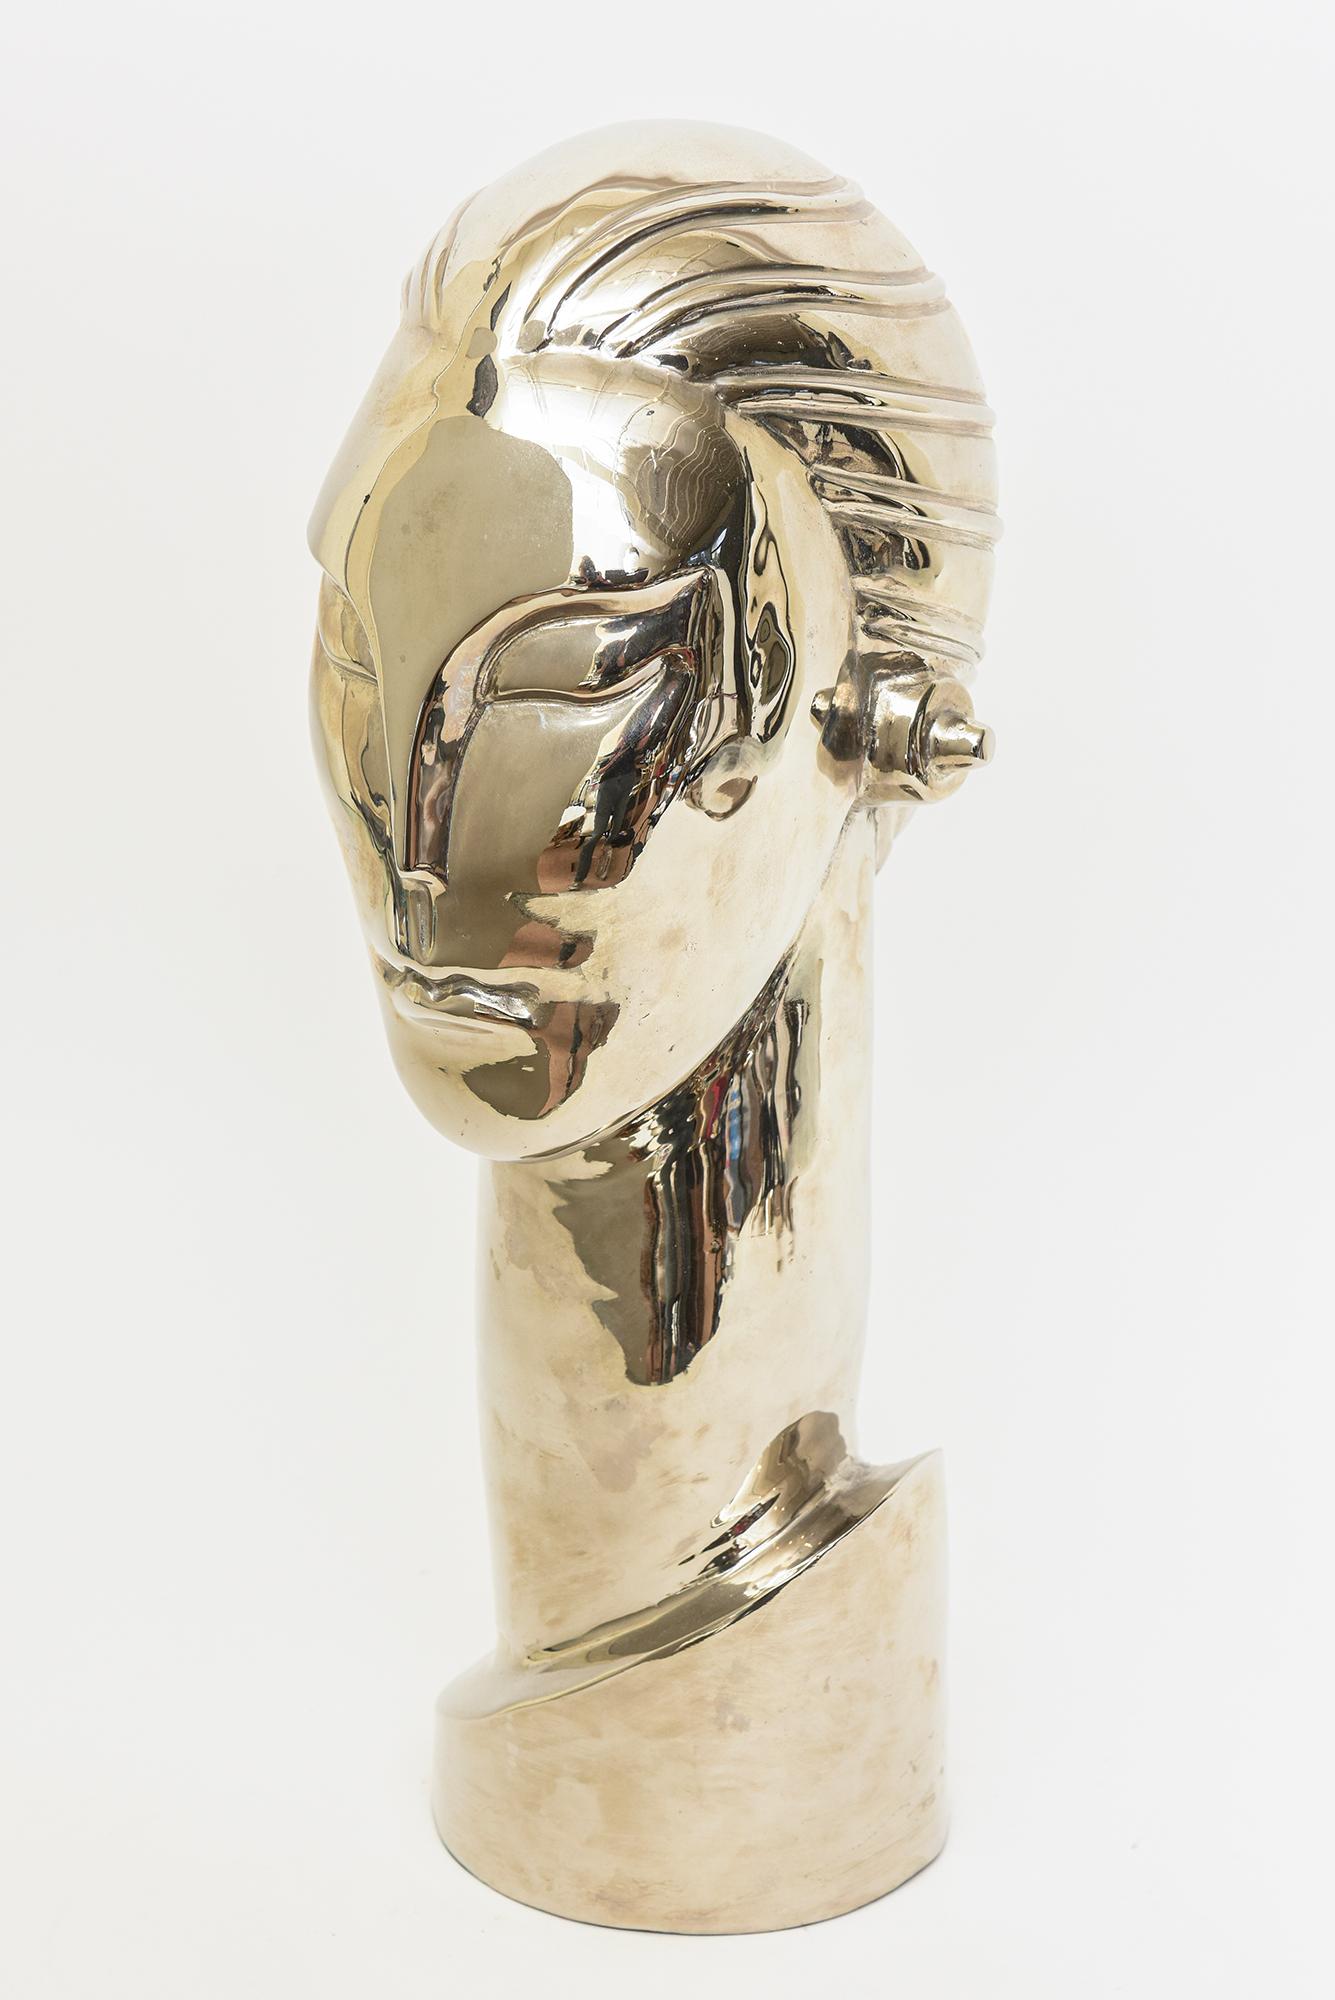 This very stylized elongated chic figurative head bust sculpture has been nickeled silver over the brass over 15 years ago and looks amazing. New green felt was placed on the bottom. The elongated and exaggerated neck adds to the interest. It is an